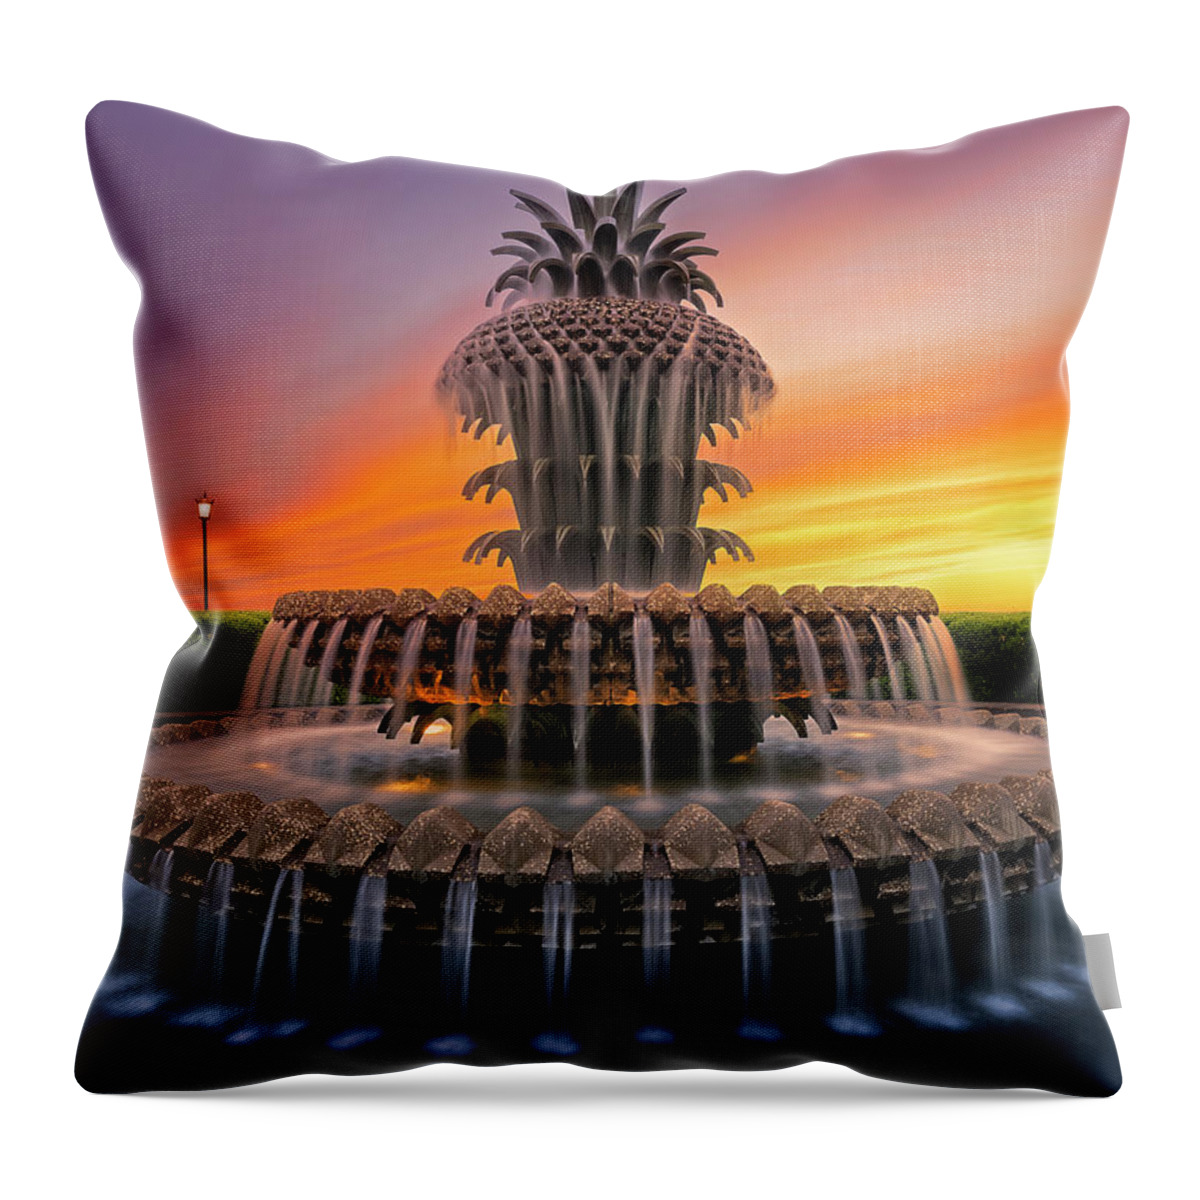 Pineapple Fountain Throw Pillow featuring the photograph Pineapple Fountain SC by Susan Candelario